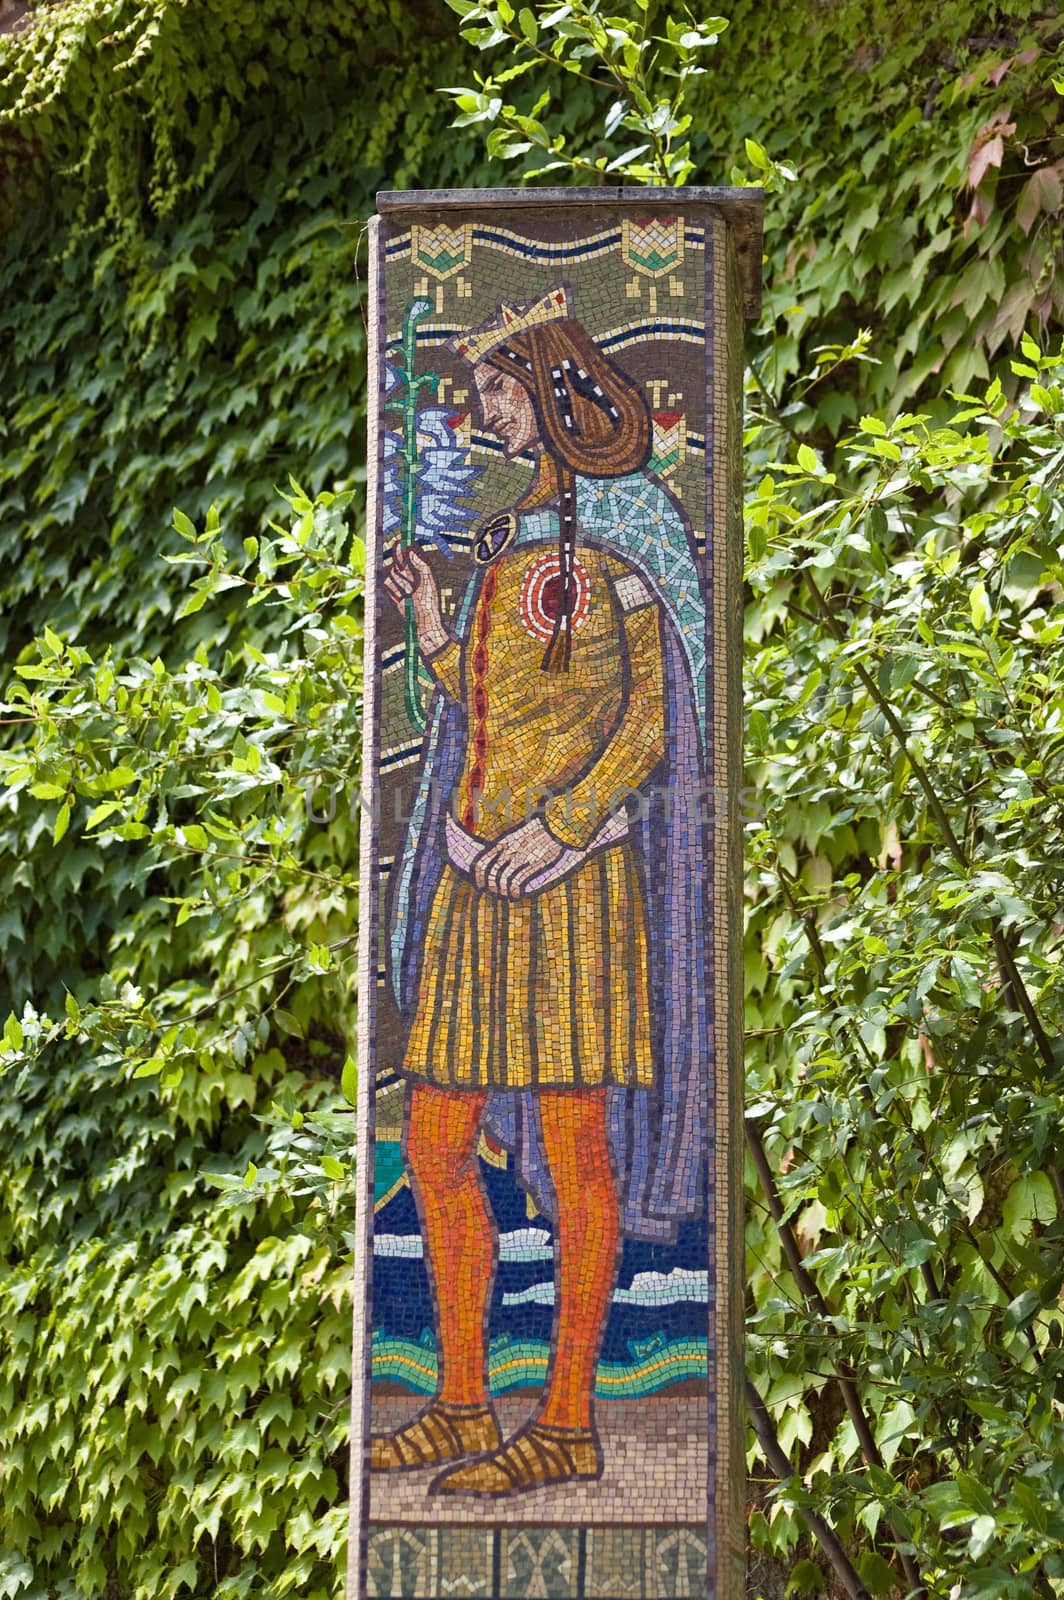 Mosaic showing the Hungarian Saint Imre Herczeg. Created in 1909 and on public display outside the Hungarian Pavilion in Venice Giardini ever since.